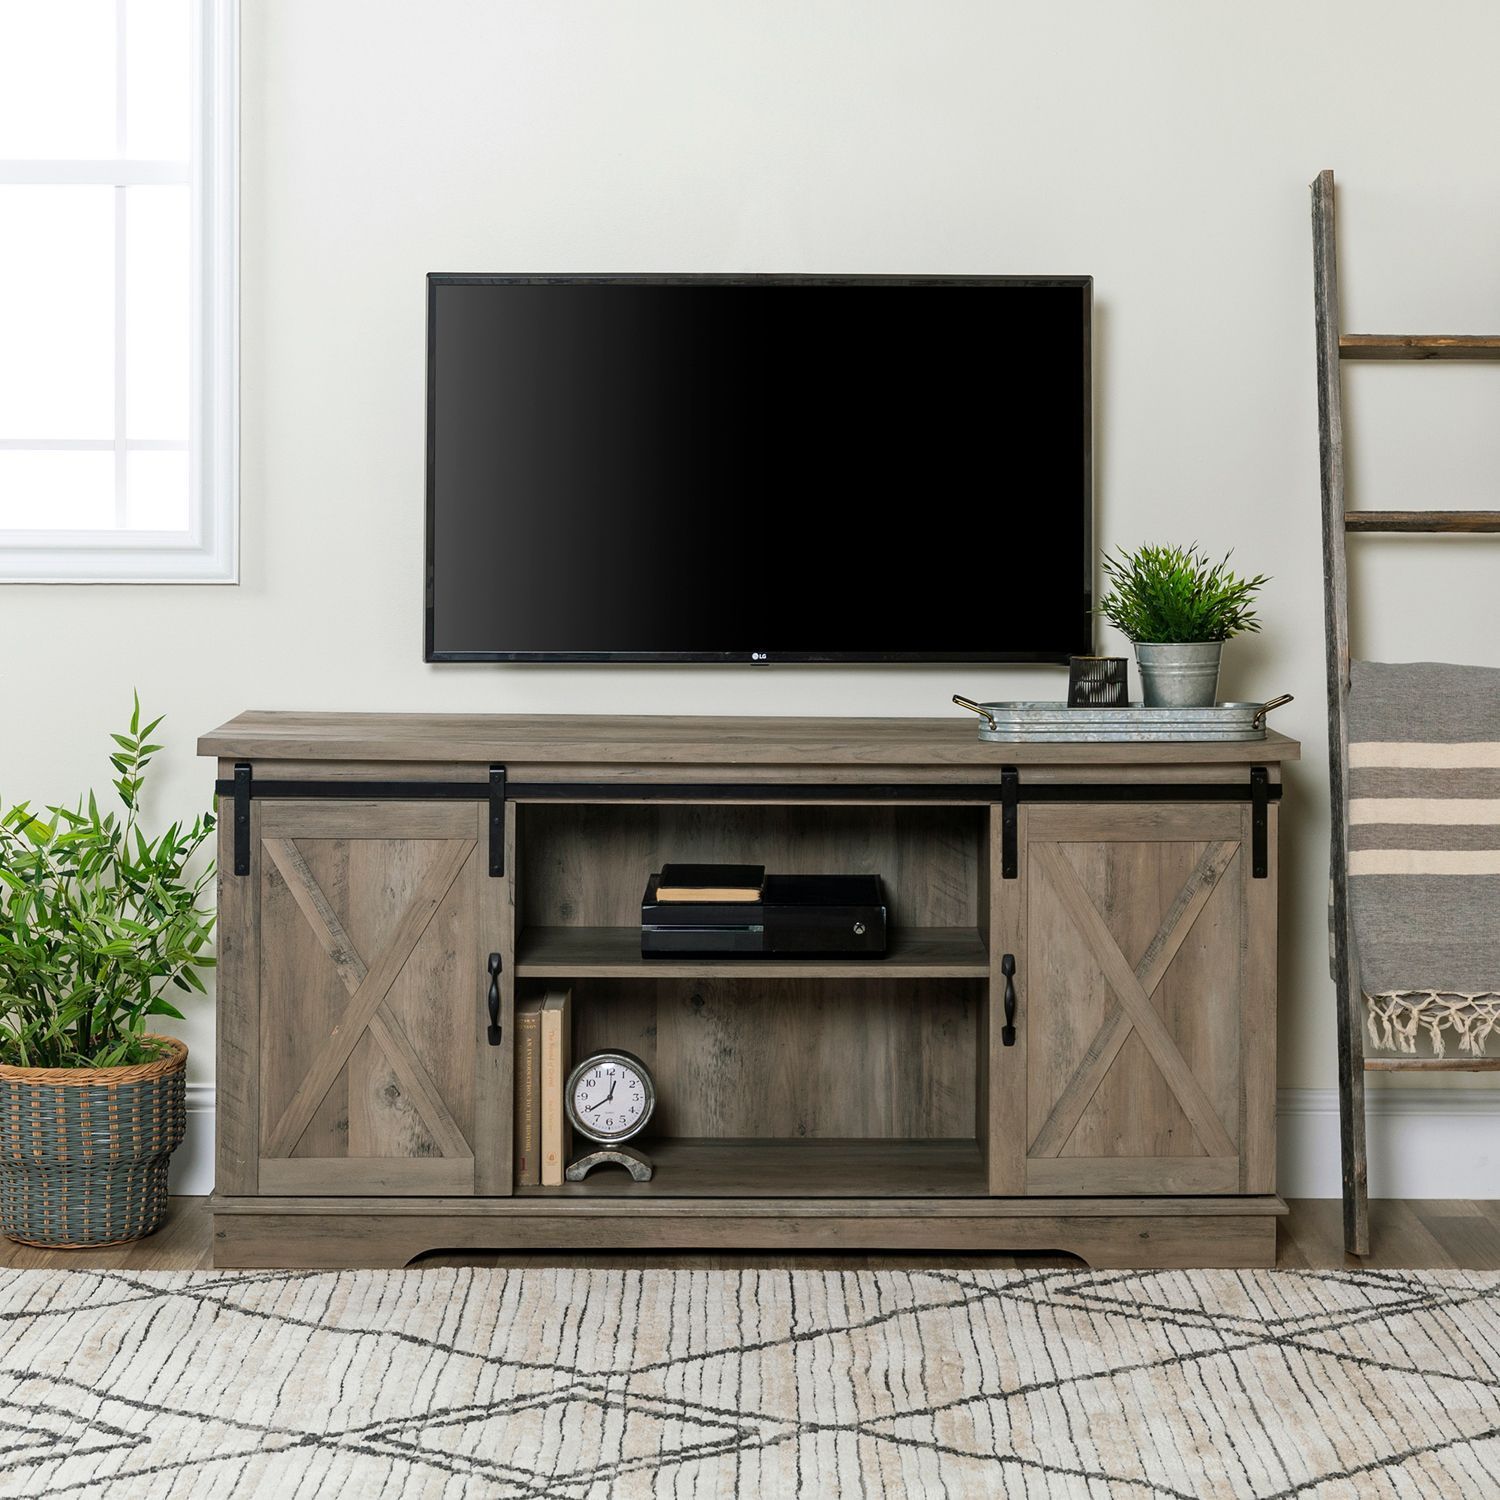 Pincody On Caseras Kitchen | Farm House Living Room Intended For Modern Farmhouse Style 58" Tv Stands With Sliding Barn Door (View 4 of 15)